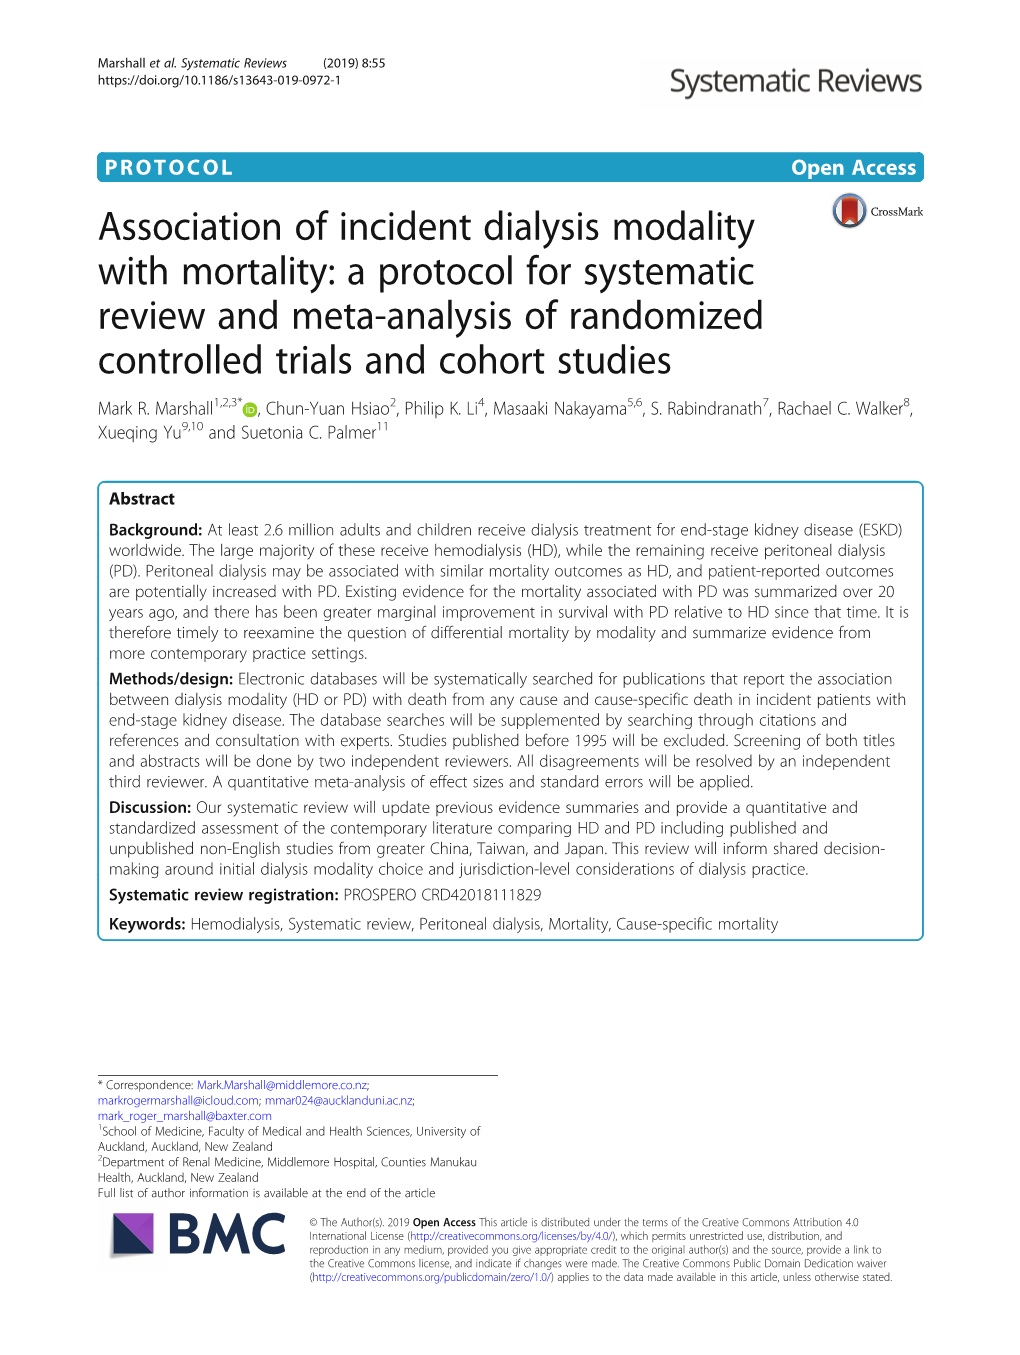 Association of Incident Dialysis Modality with Mortality: a Protocol for Systematic Review and Meta-Analysis of Randomized Controlled Trials and Cohort Studies Mark R